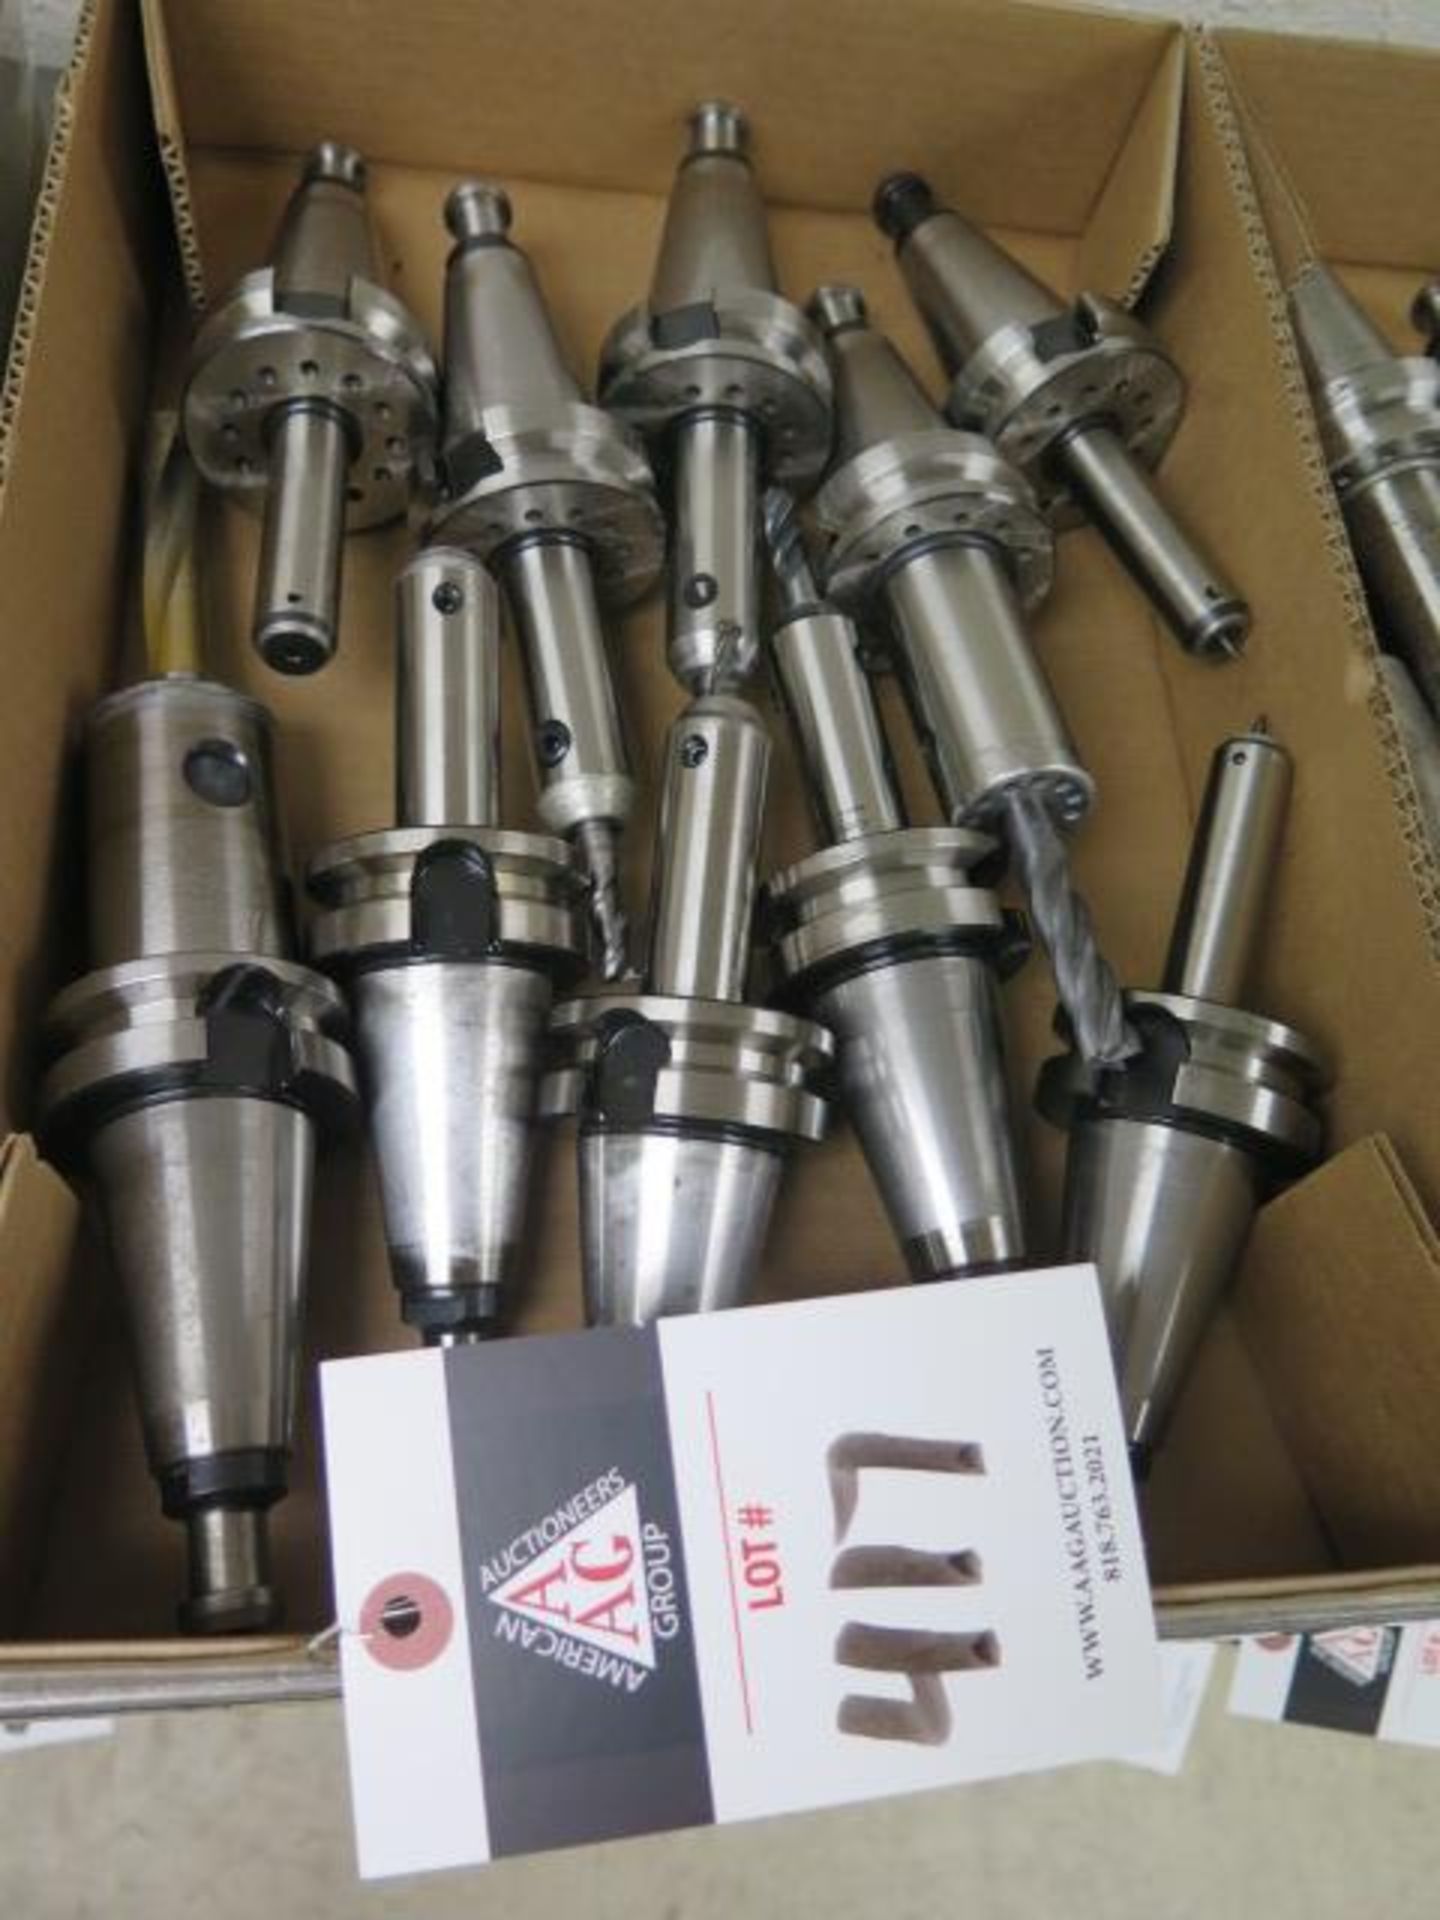 Lyndex BT-40 Taper 24,000 RPM Balanced Tooling (10) (SOLD AS-IS - NO WARRANTY)